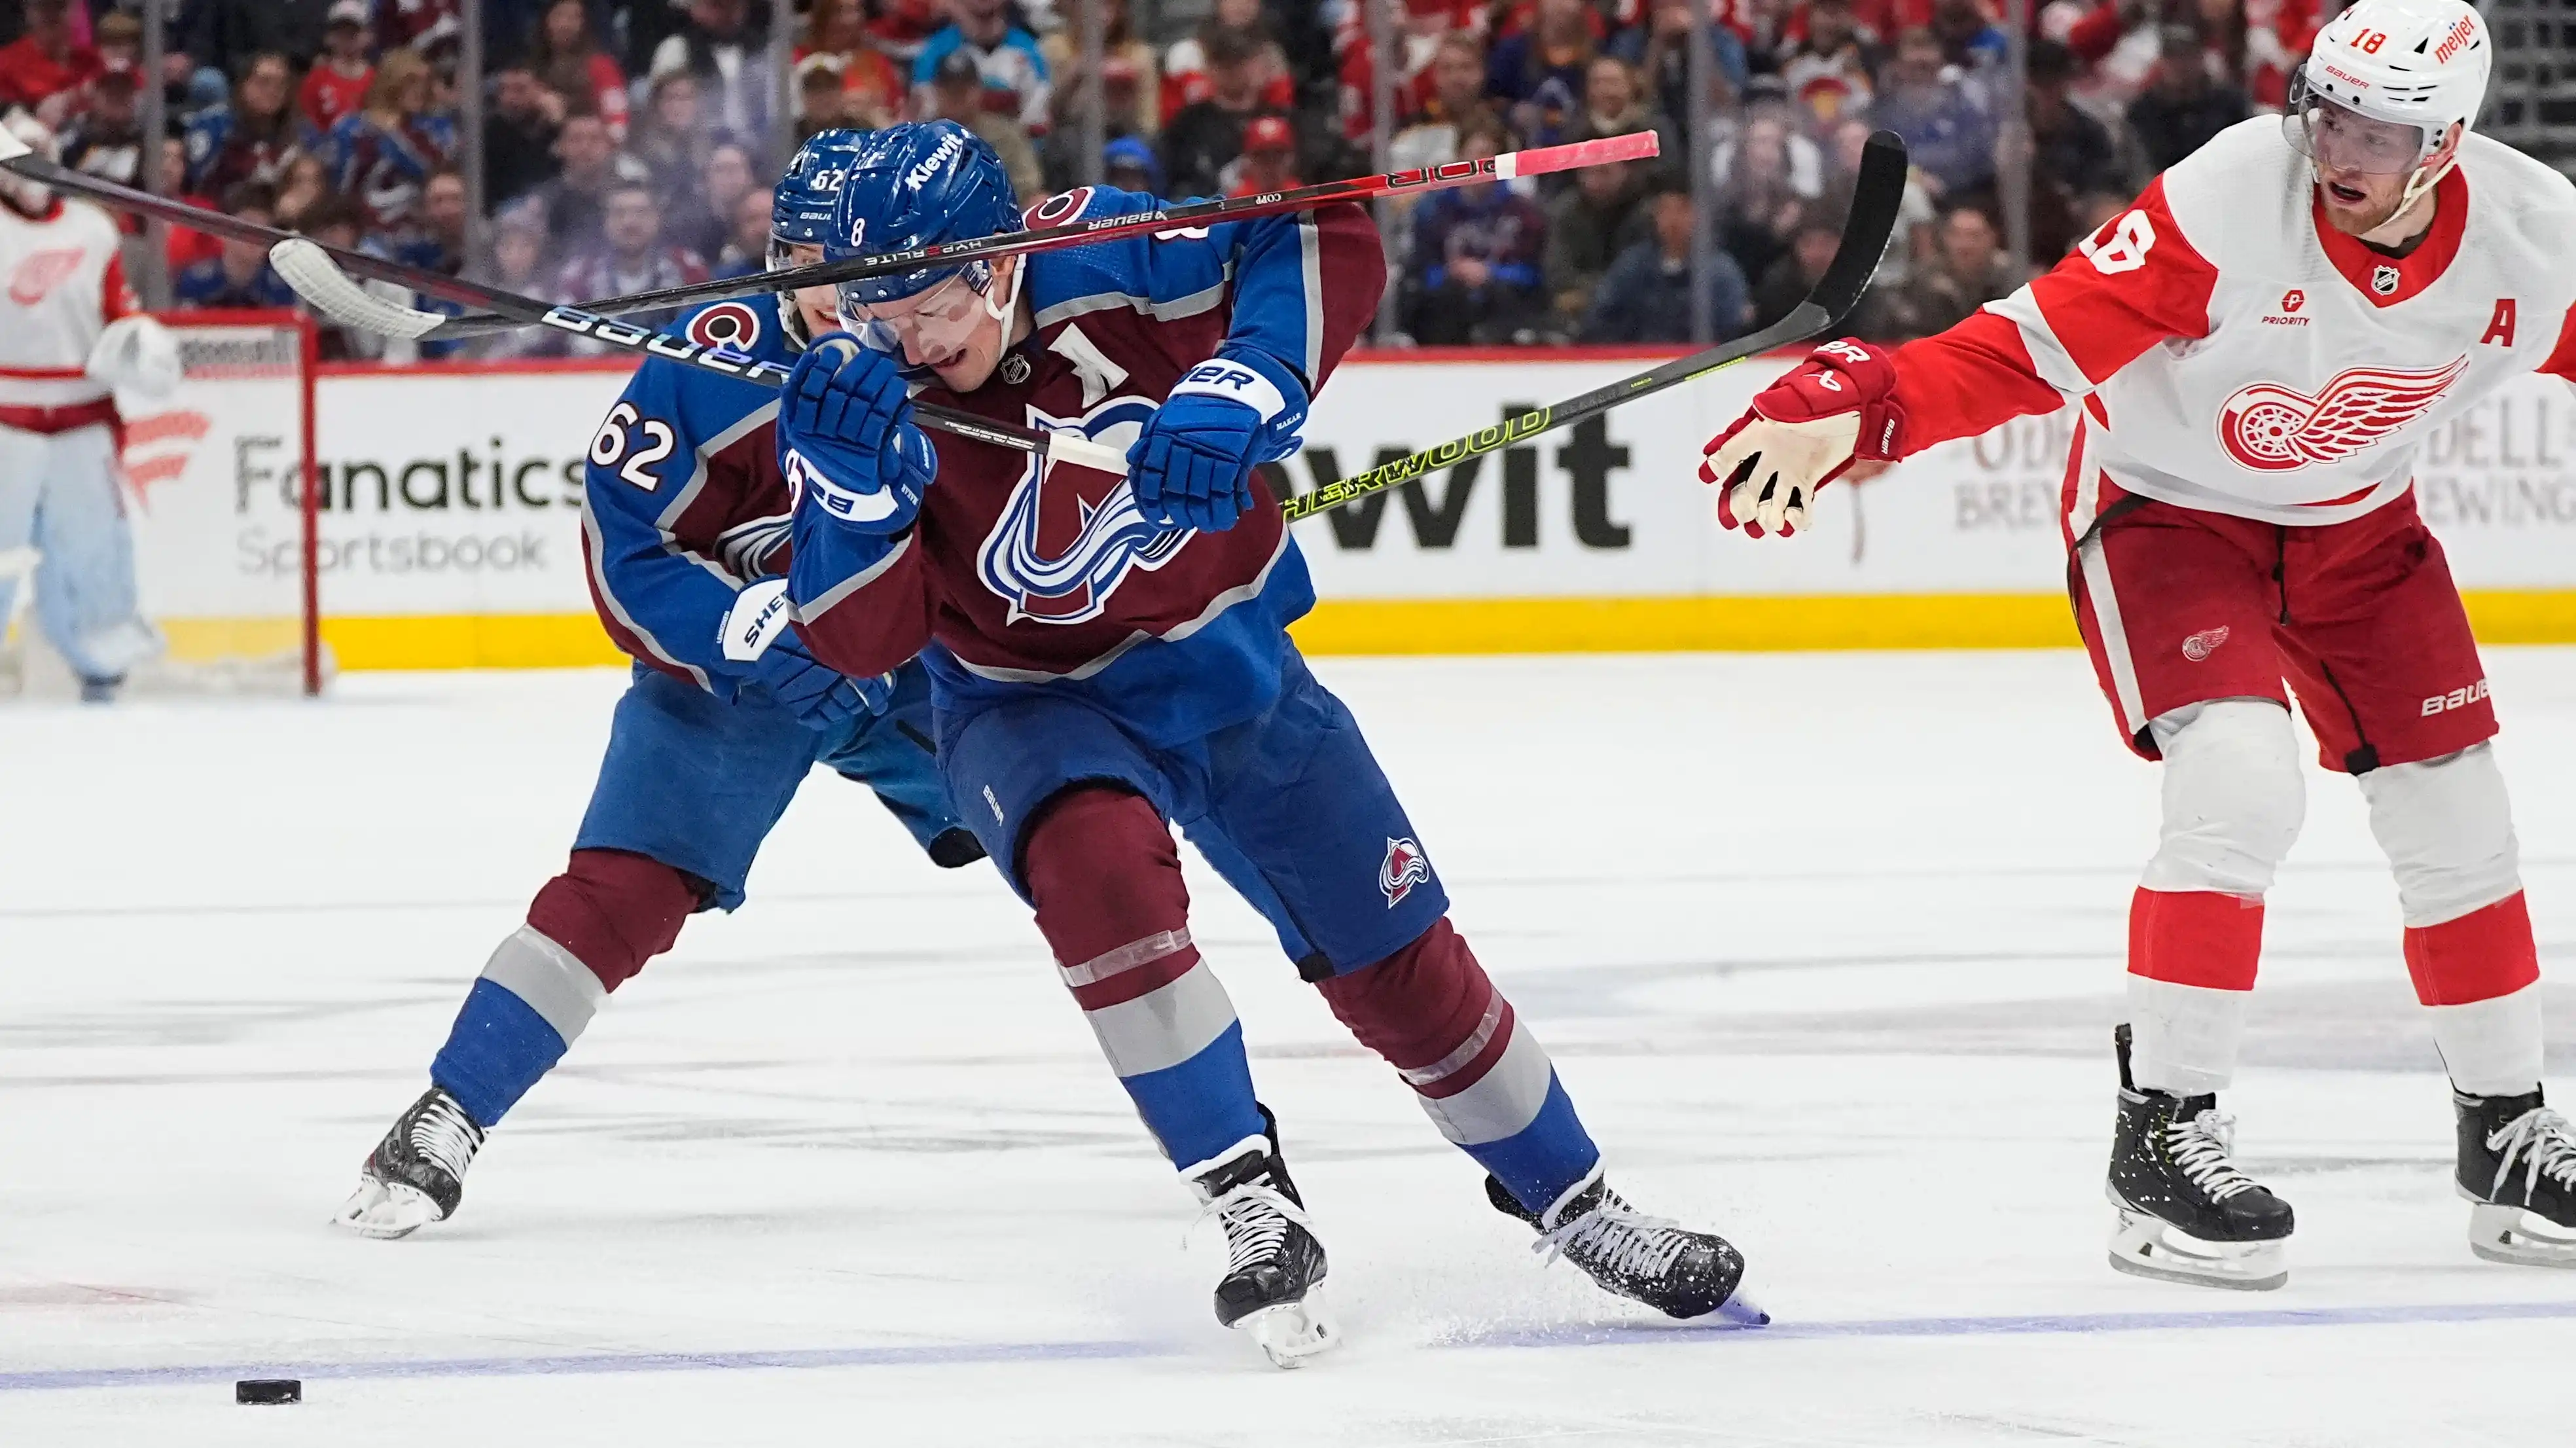 Cale Makar hat trick, Nathan MacKinnon extends streak in Colorado Avalanche win over Detroit Red Wings